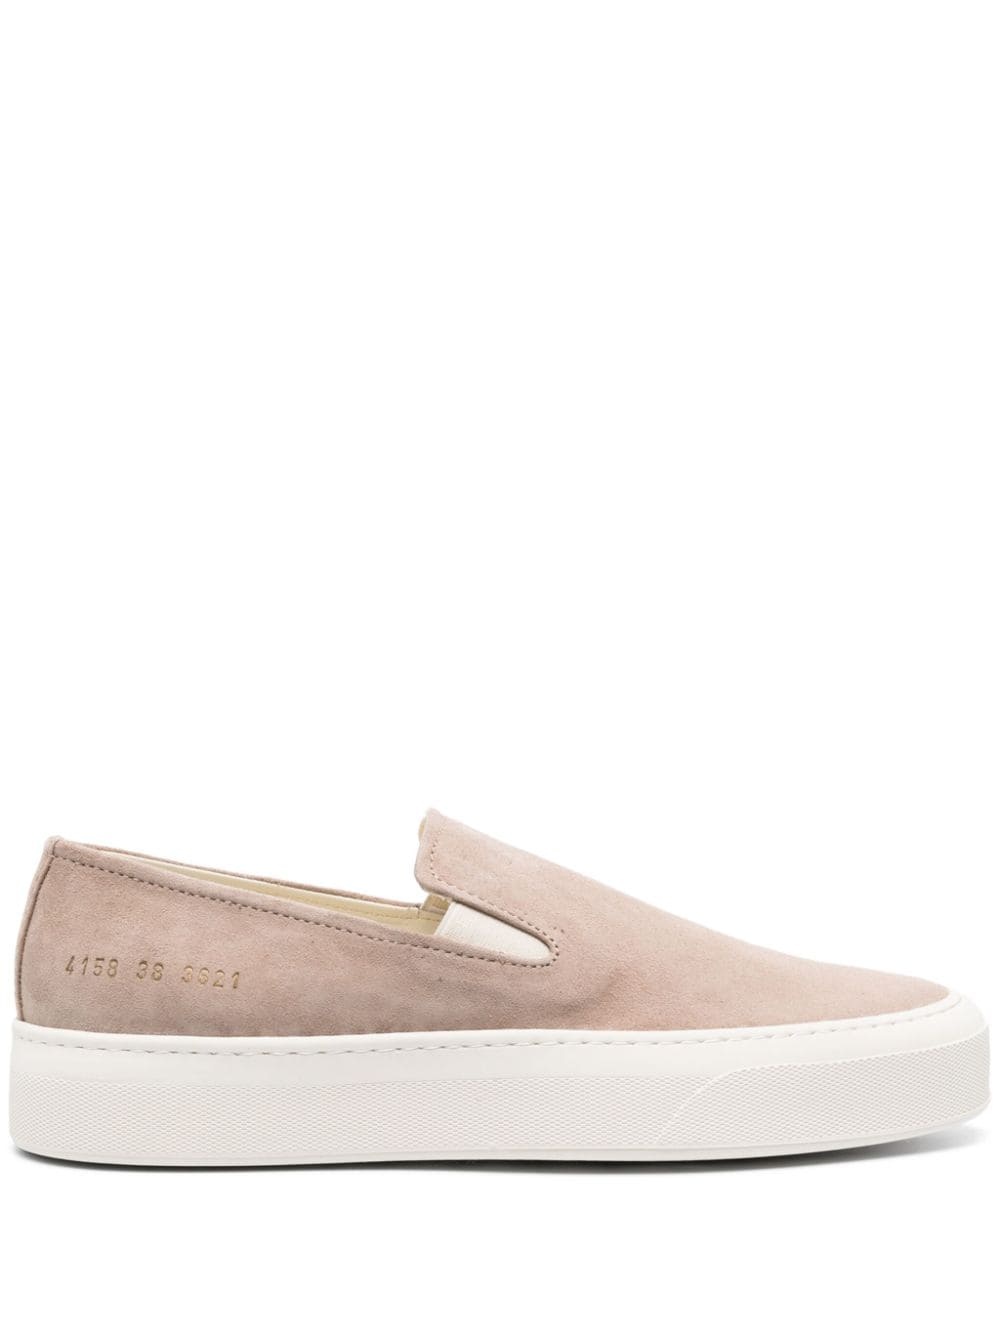 leather slip-on sneakers - 1